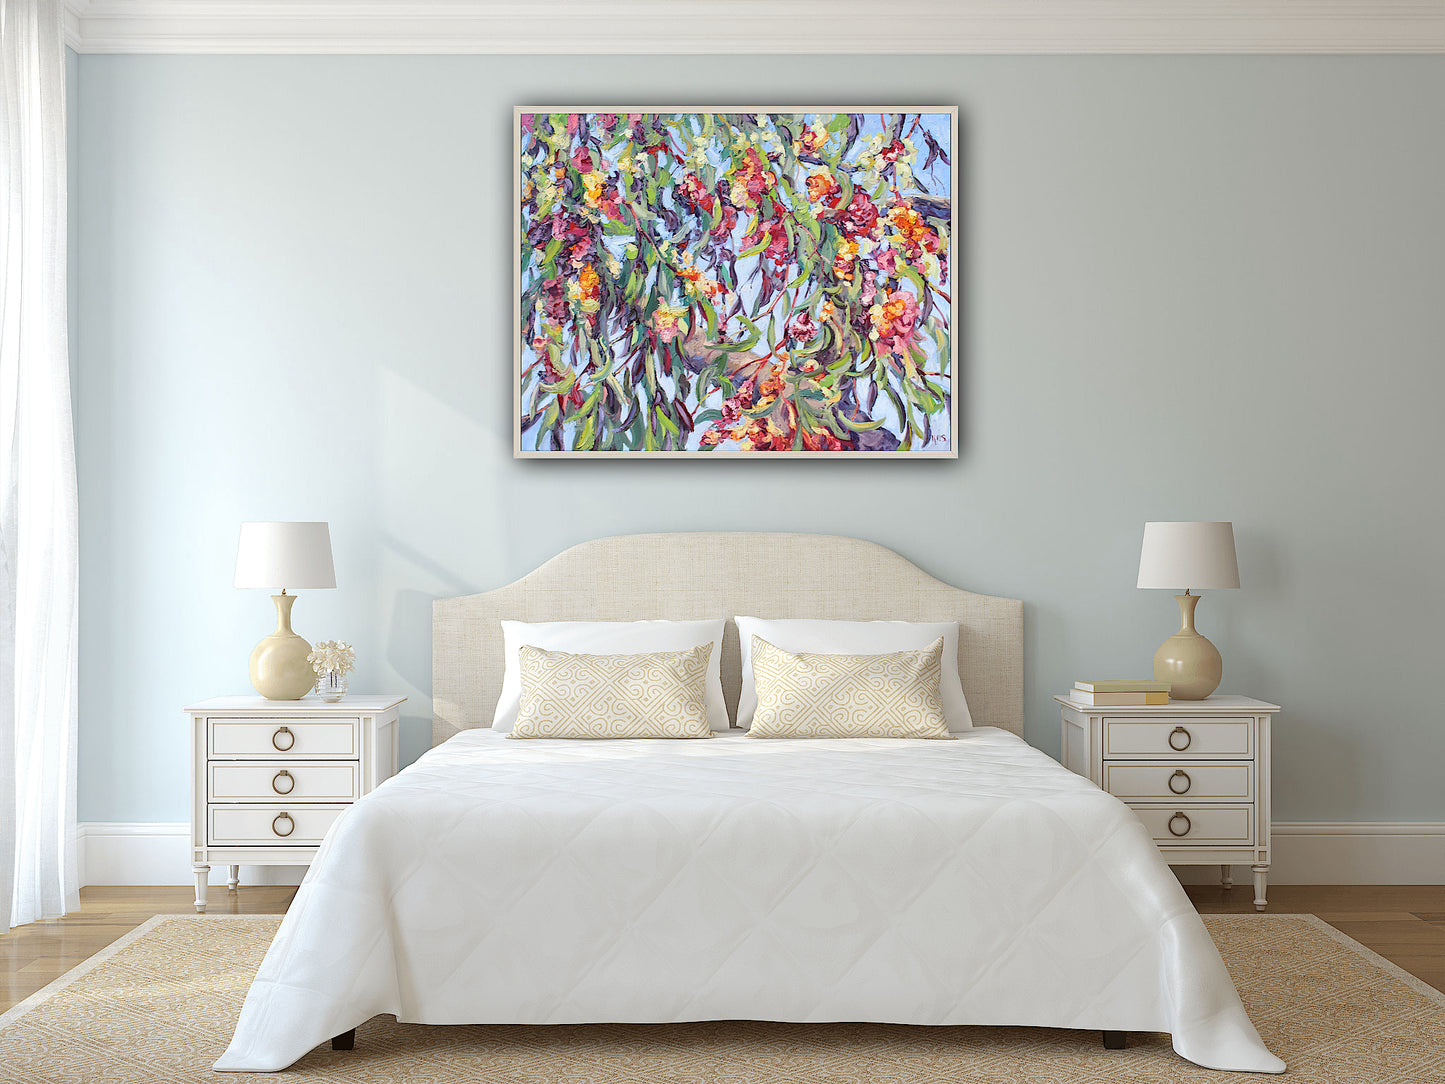 Gum Tree Blossoms, An Original Oil Painting On Canvas